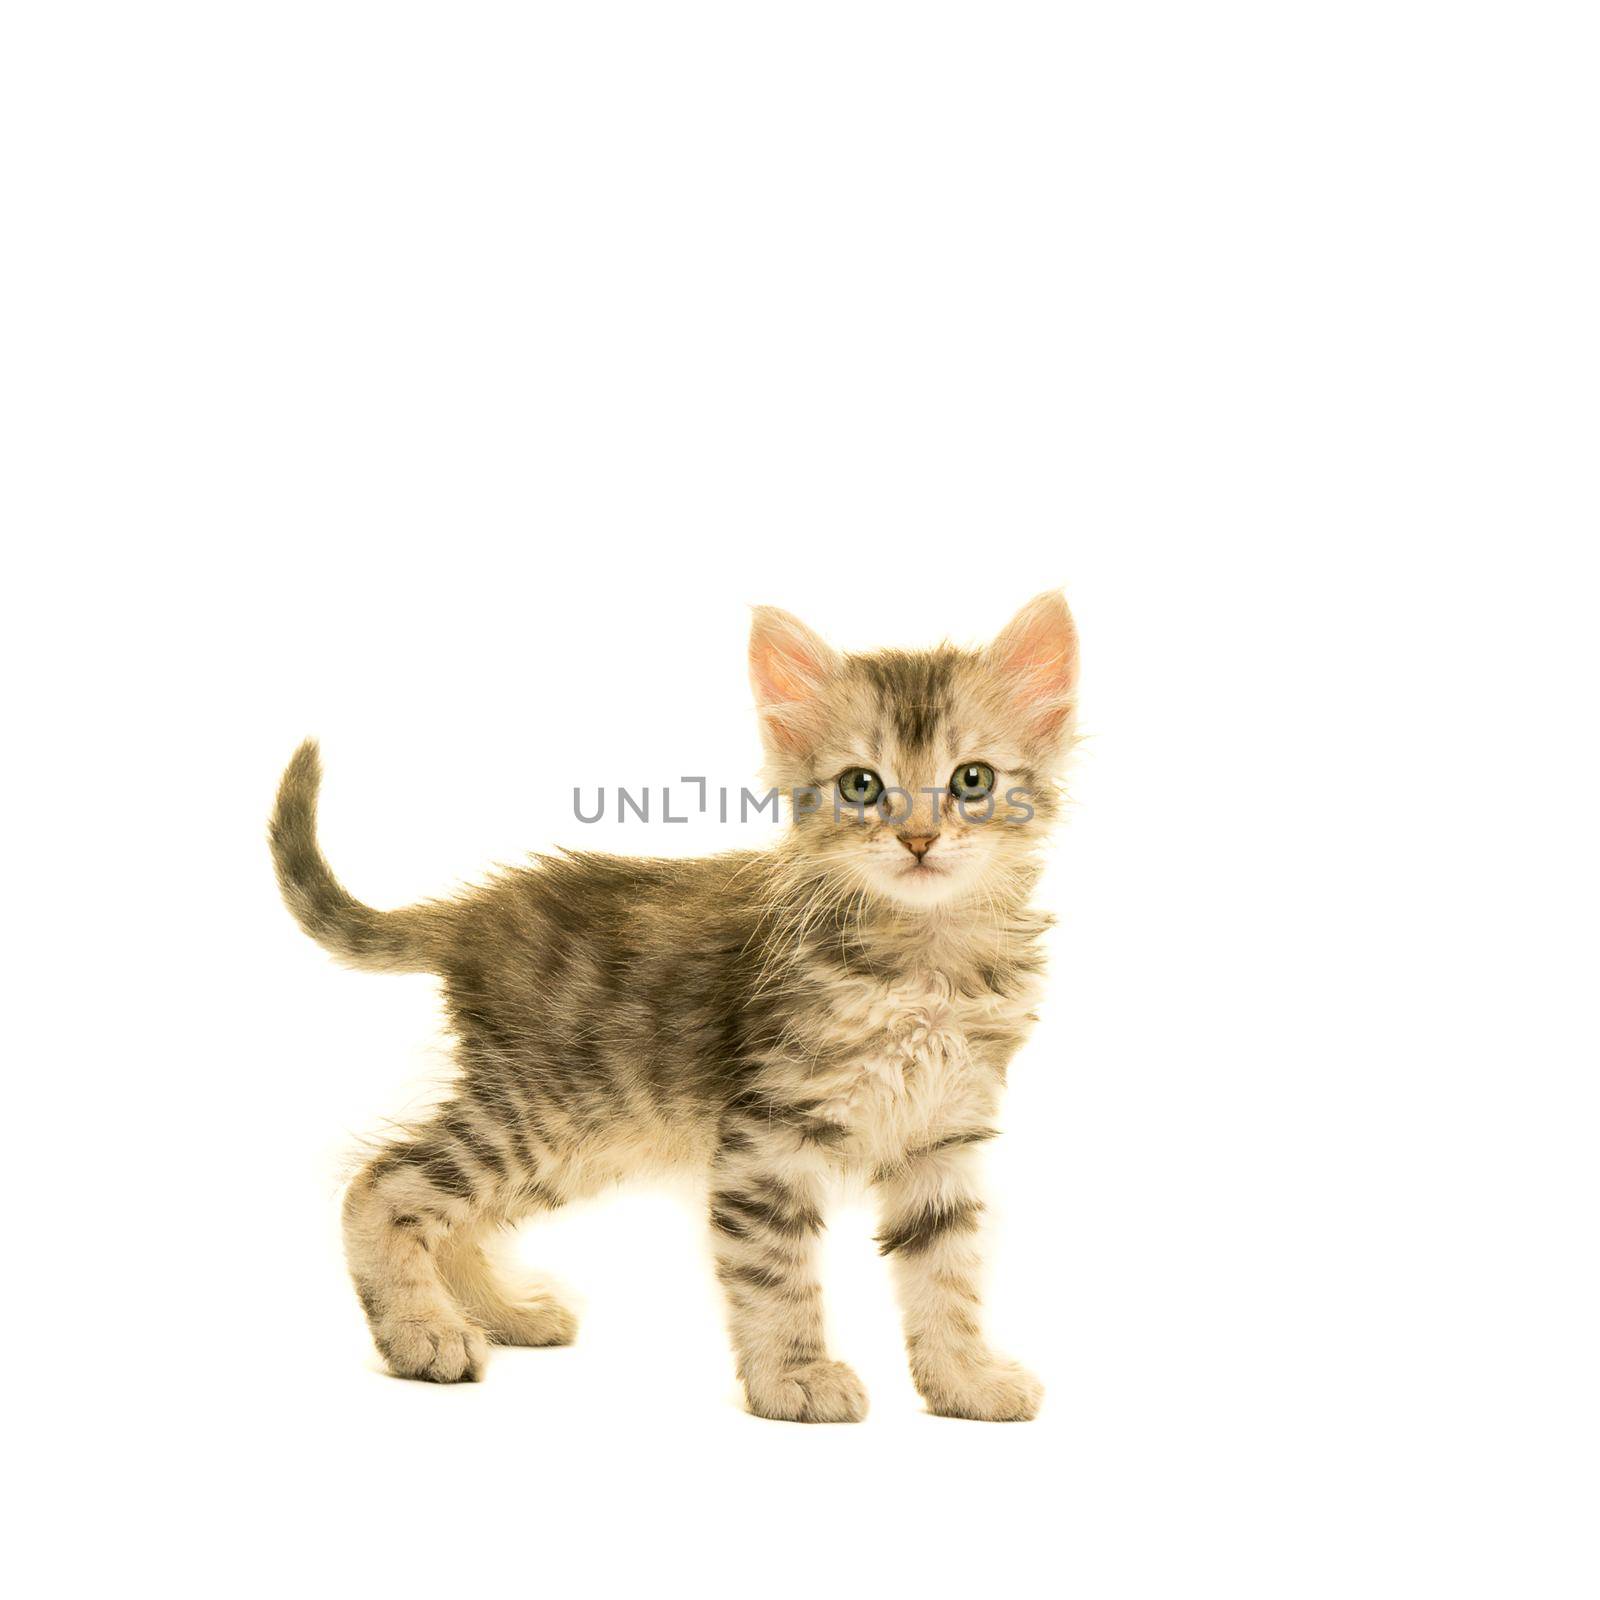 Tabby turkish angora cat kitten looking at the camera isolated on a white background